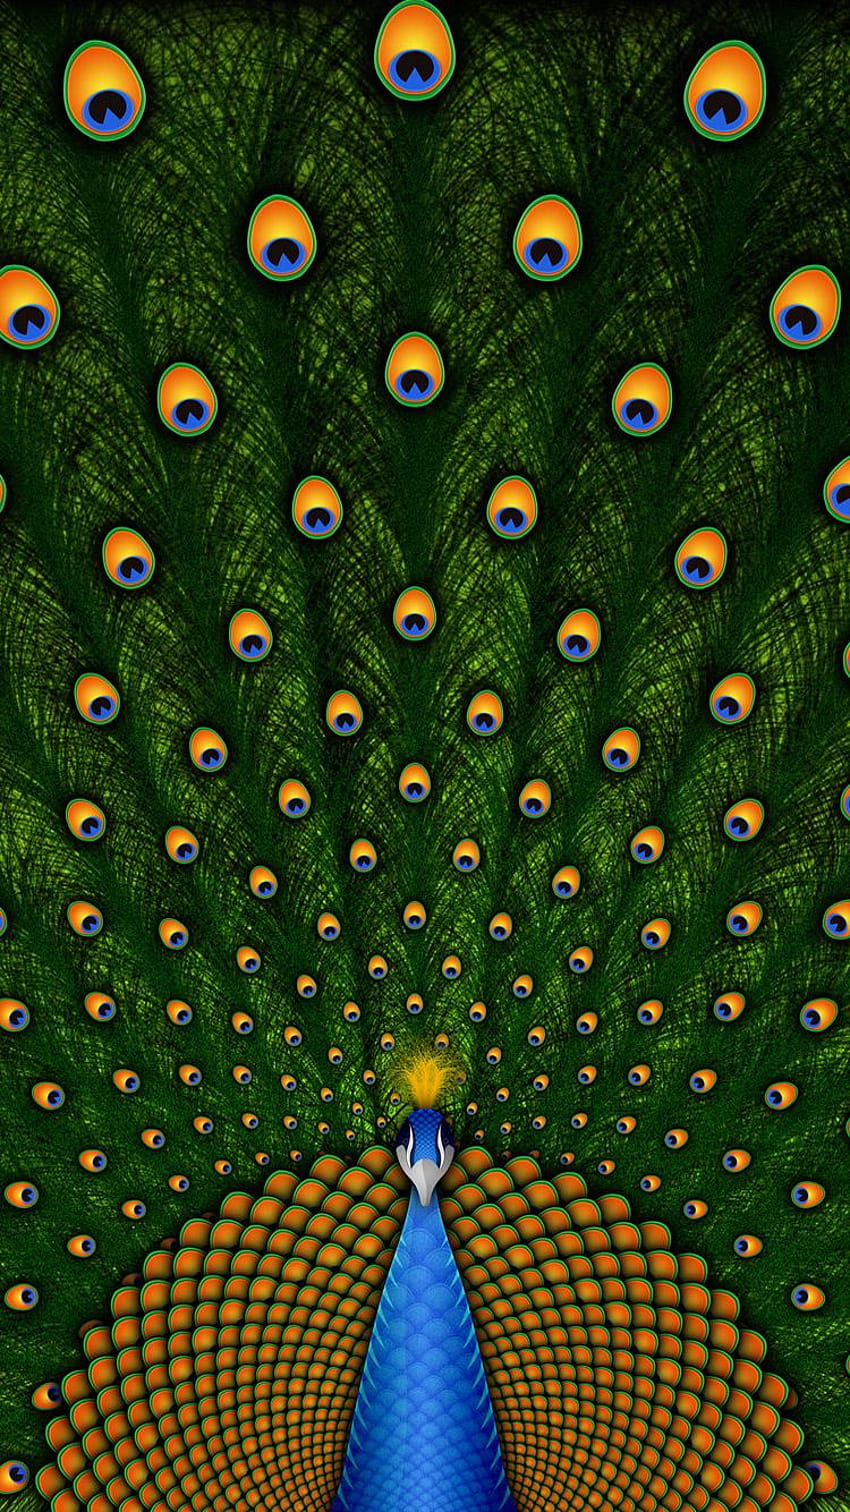 30 Girly for iPhone 6s/ 6/ 5s/, lady peacock HD phone wallpaper